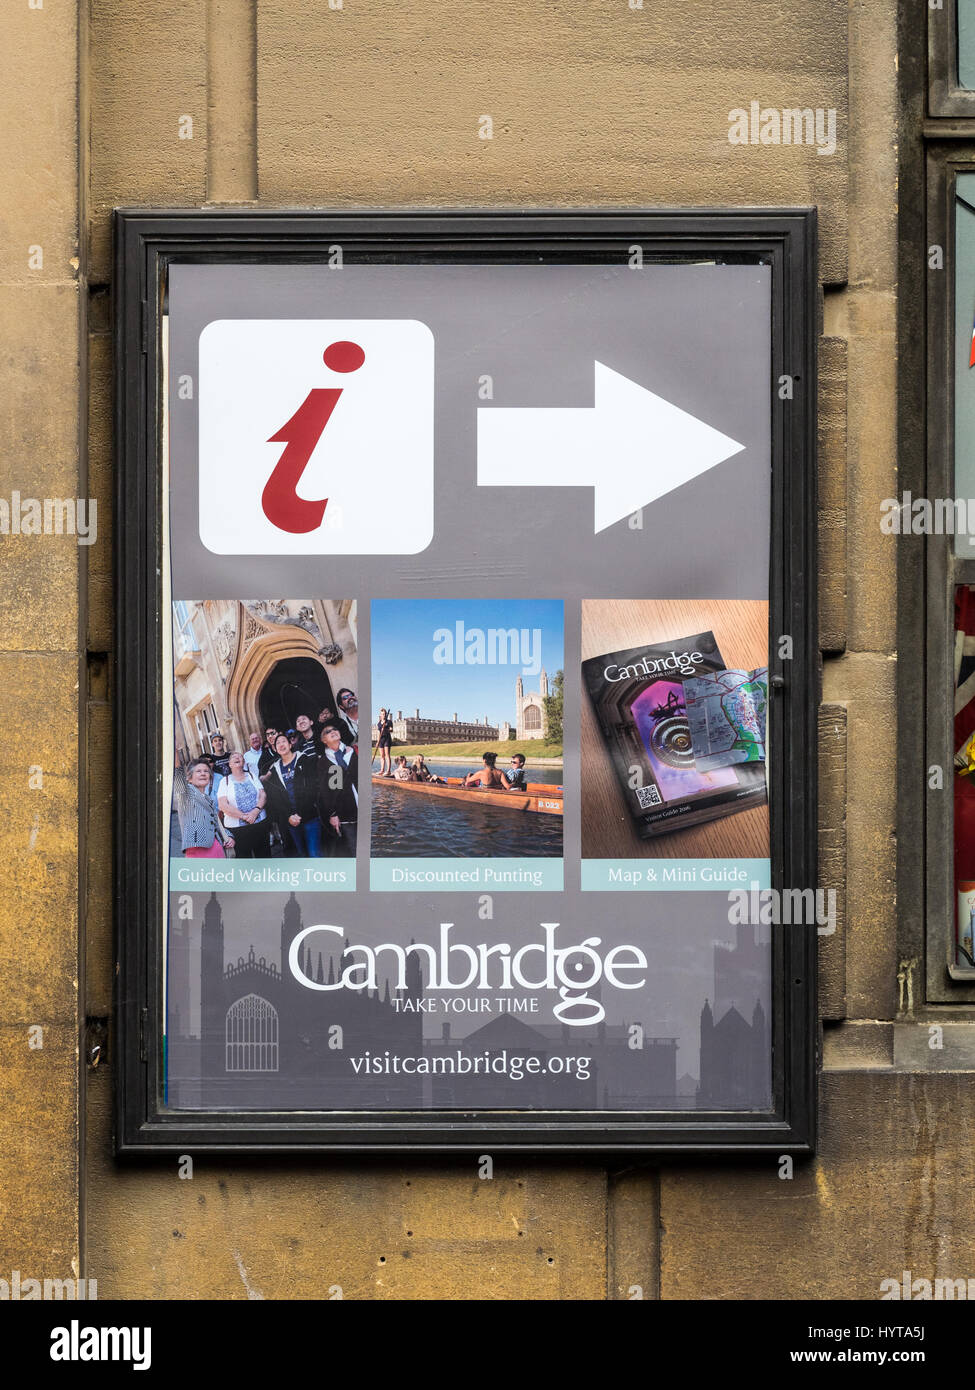 Cambridge Tourist Information - A sign pointing to the Cambridge Tourist Infomation office on Peas Hill, Cambridge, UK Stock Photo